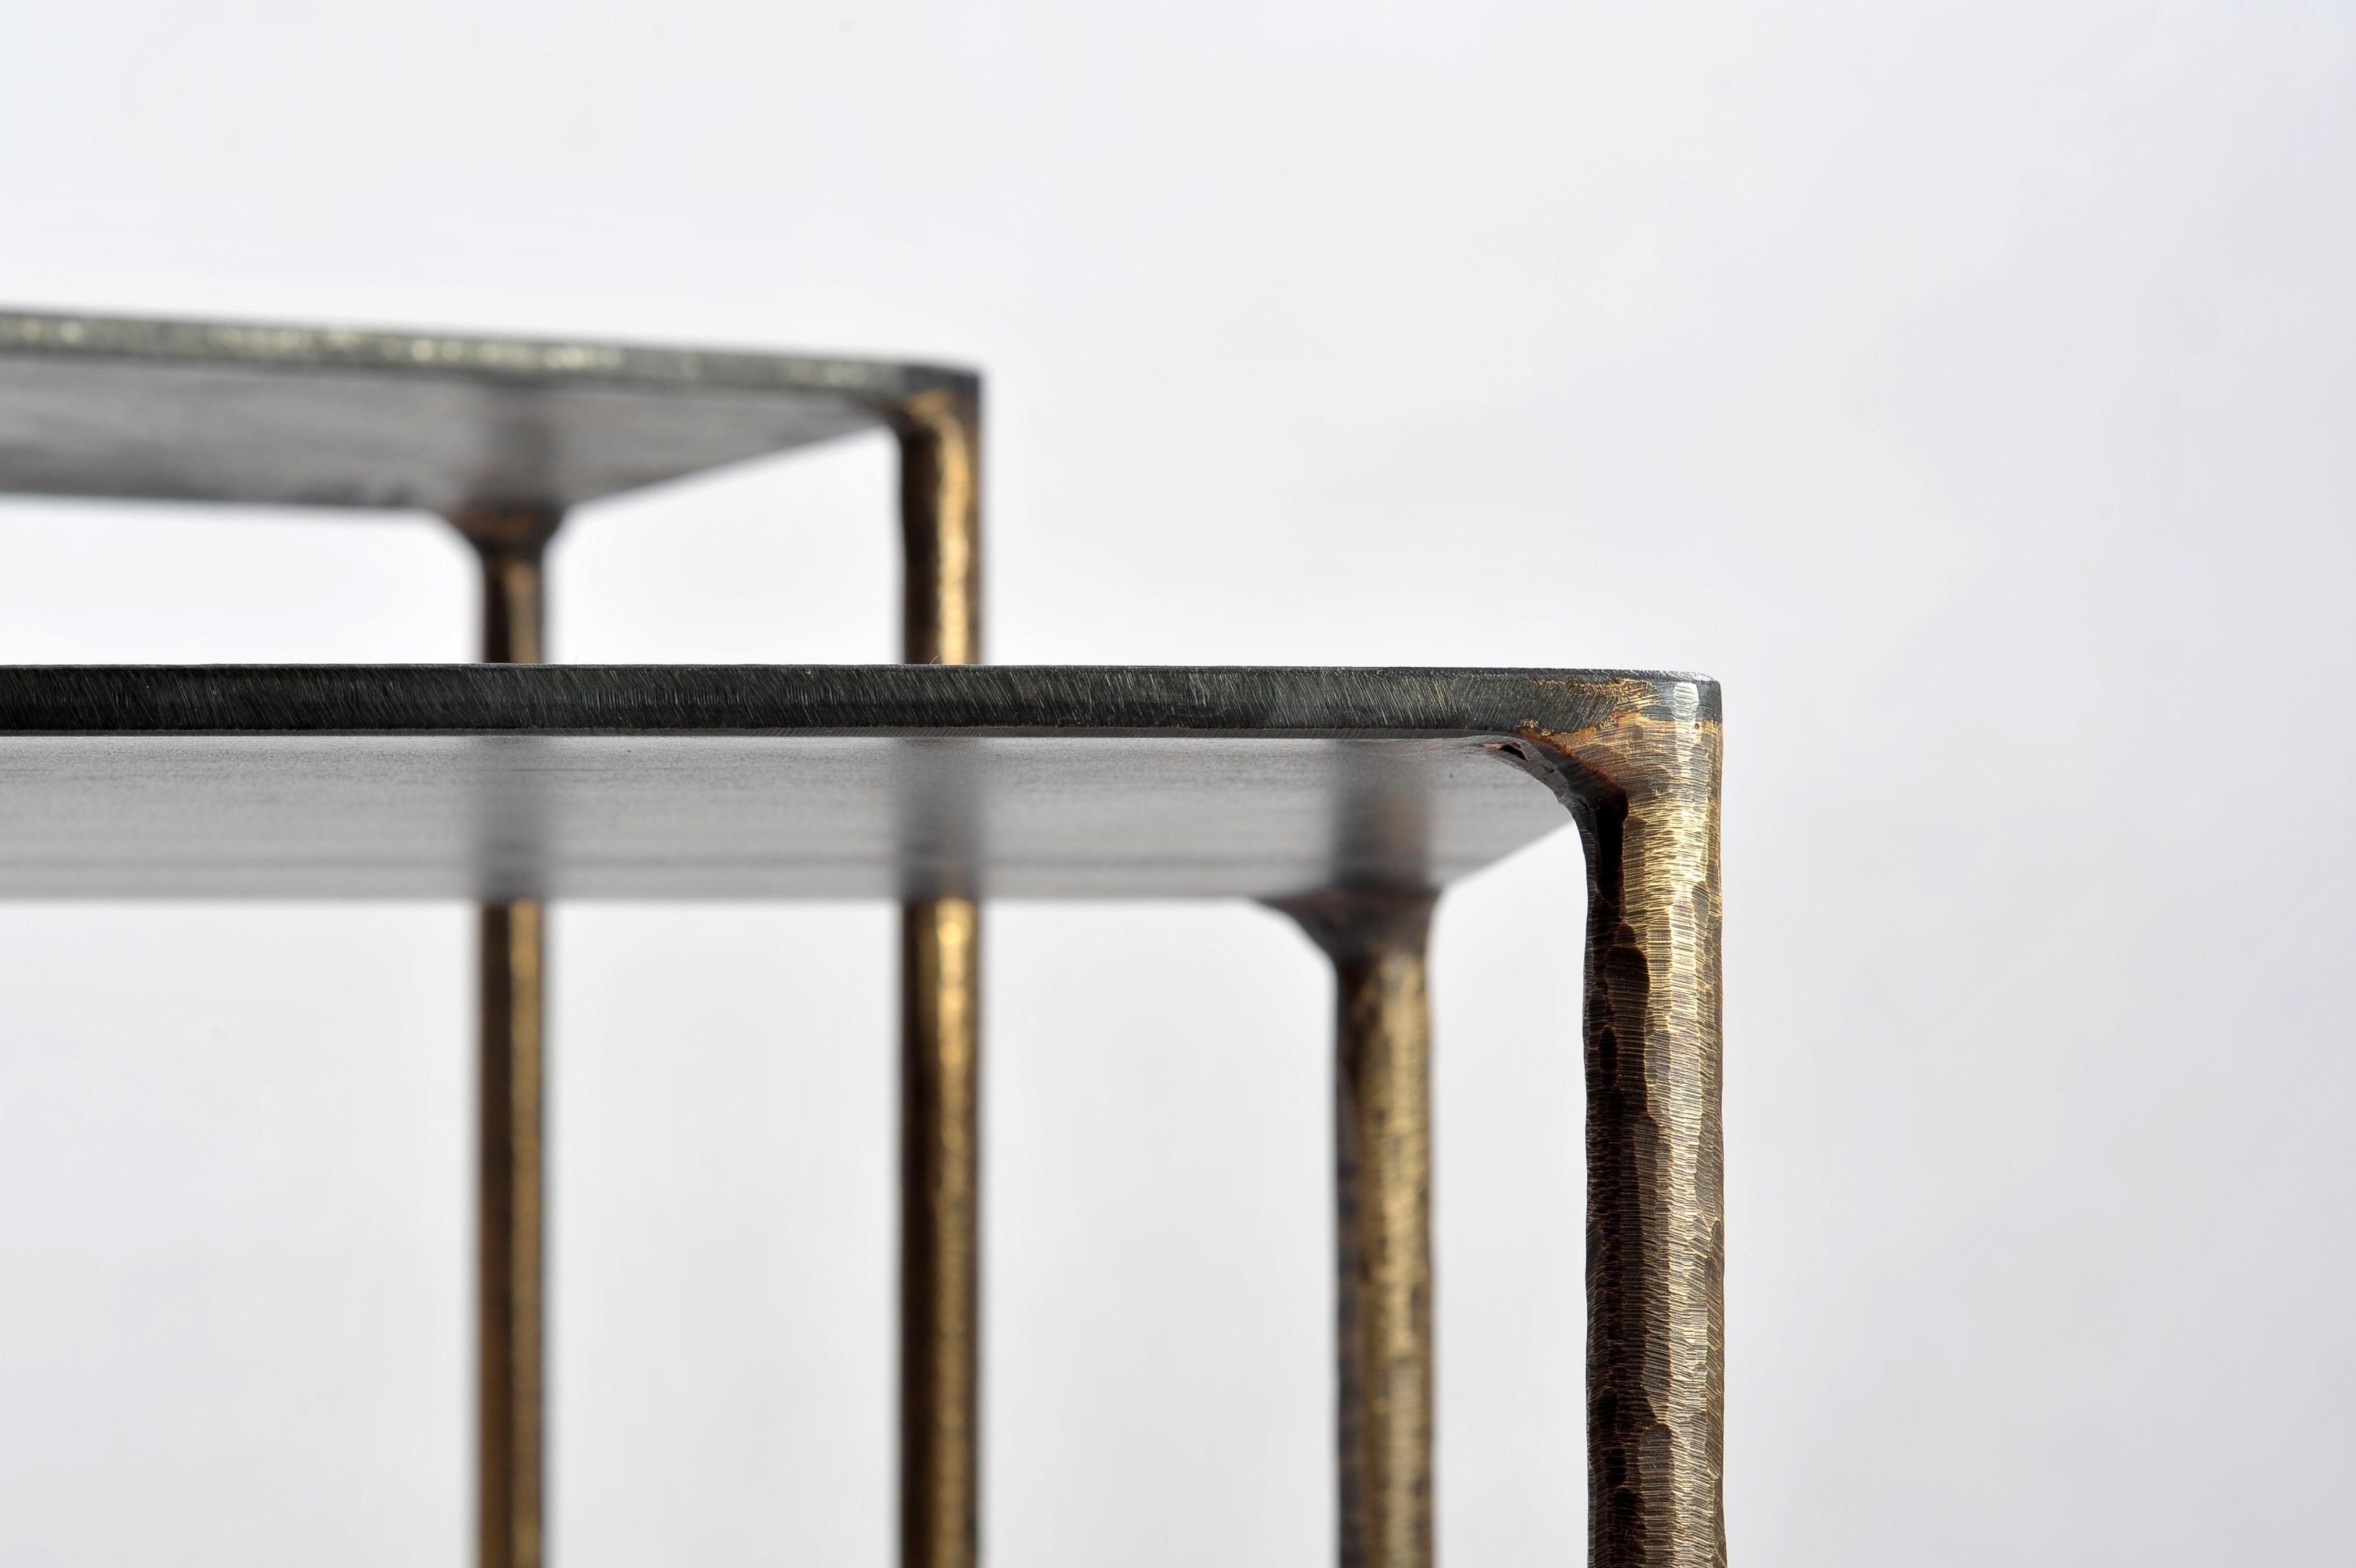 Brass side table signed by Lukasz Friedrich
Textured side or coffee table
Materials: Legs, patinated brass; top, patinated and waxed steel
Dimensions: 
D 28 cm, L 38 cm, H 50 cm
D 38 cm, L 68 cm, H 40 cm
Signed and dated

Lukasz Friedrich